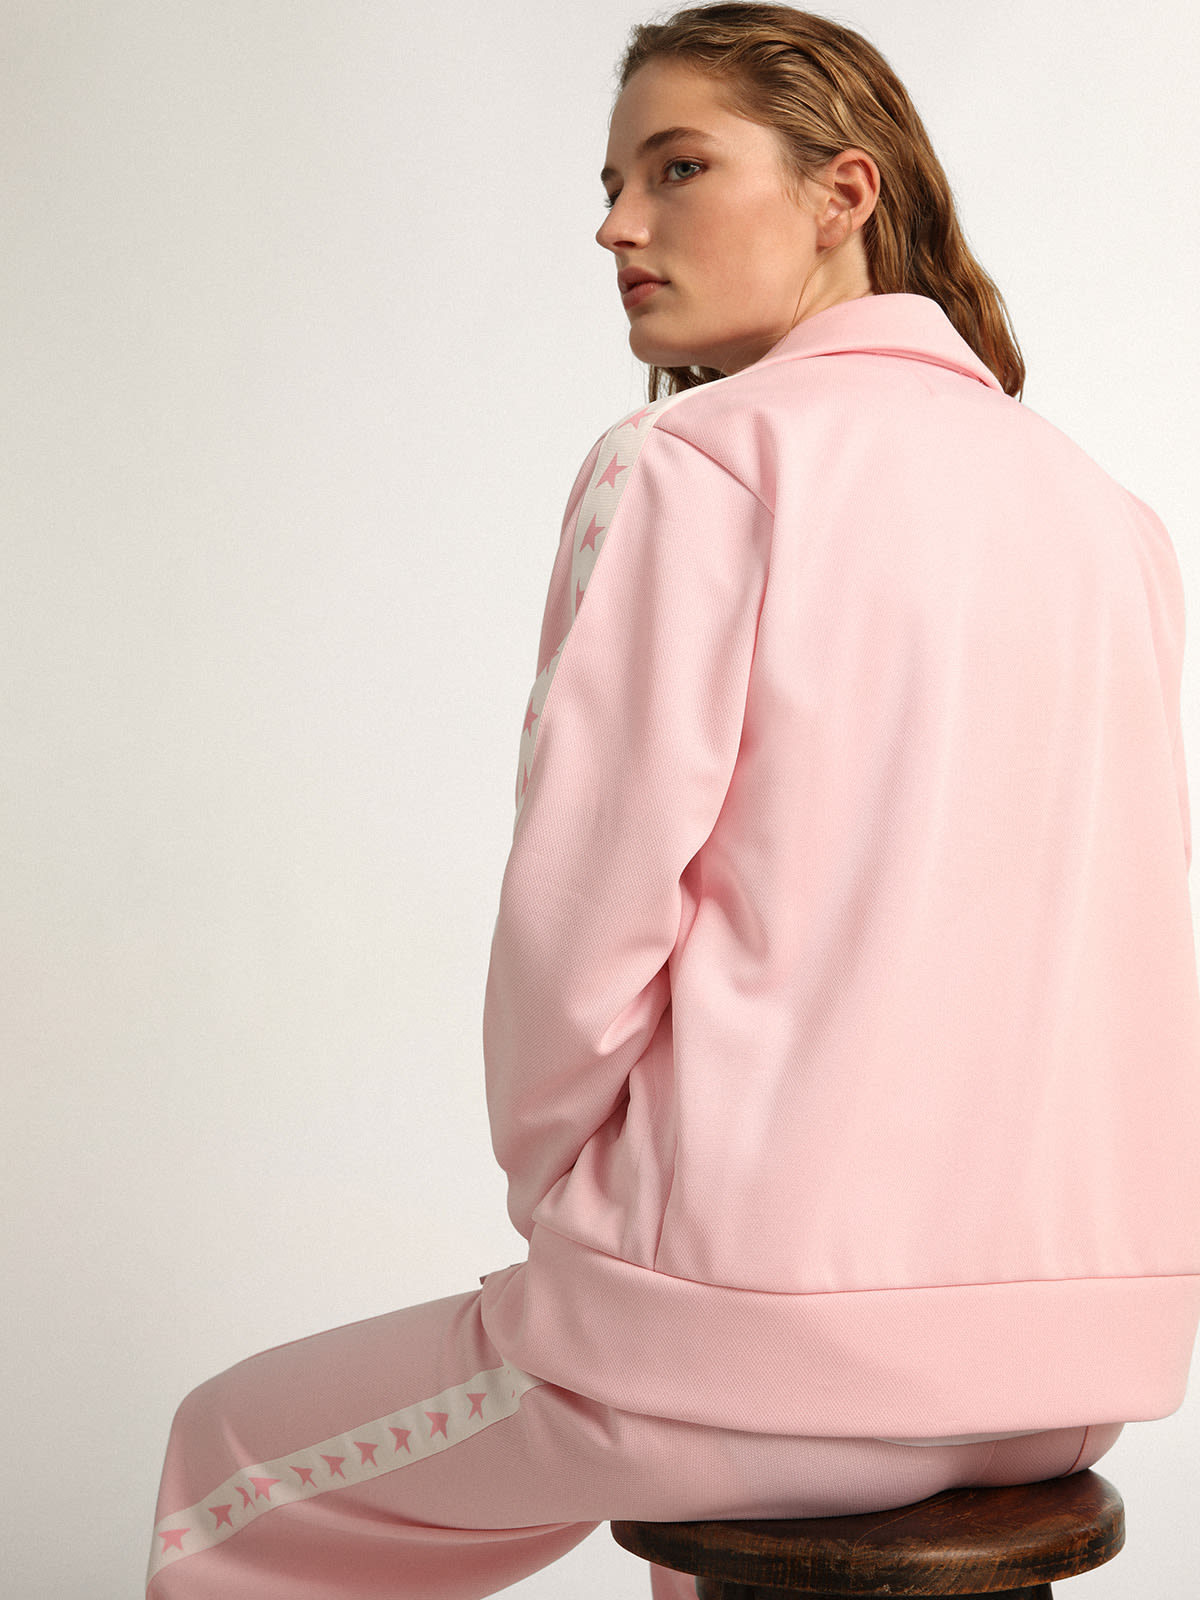 Golden Goose - Pink Denise Star Collection zipped sweatshirt with white strip and contrasting pink stars in 